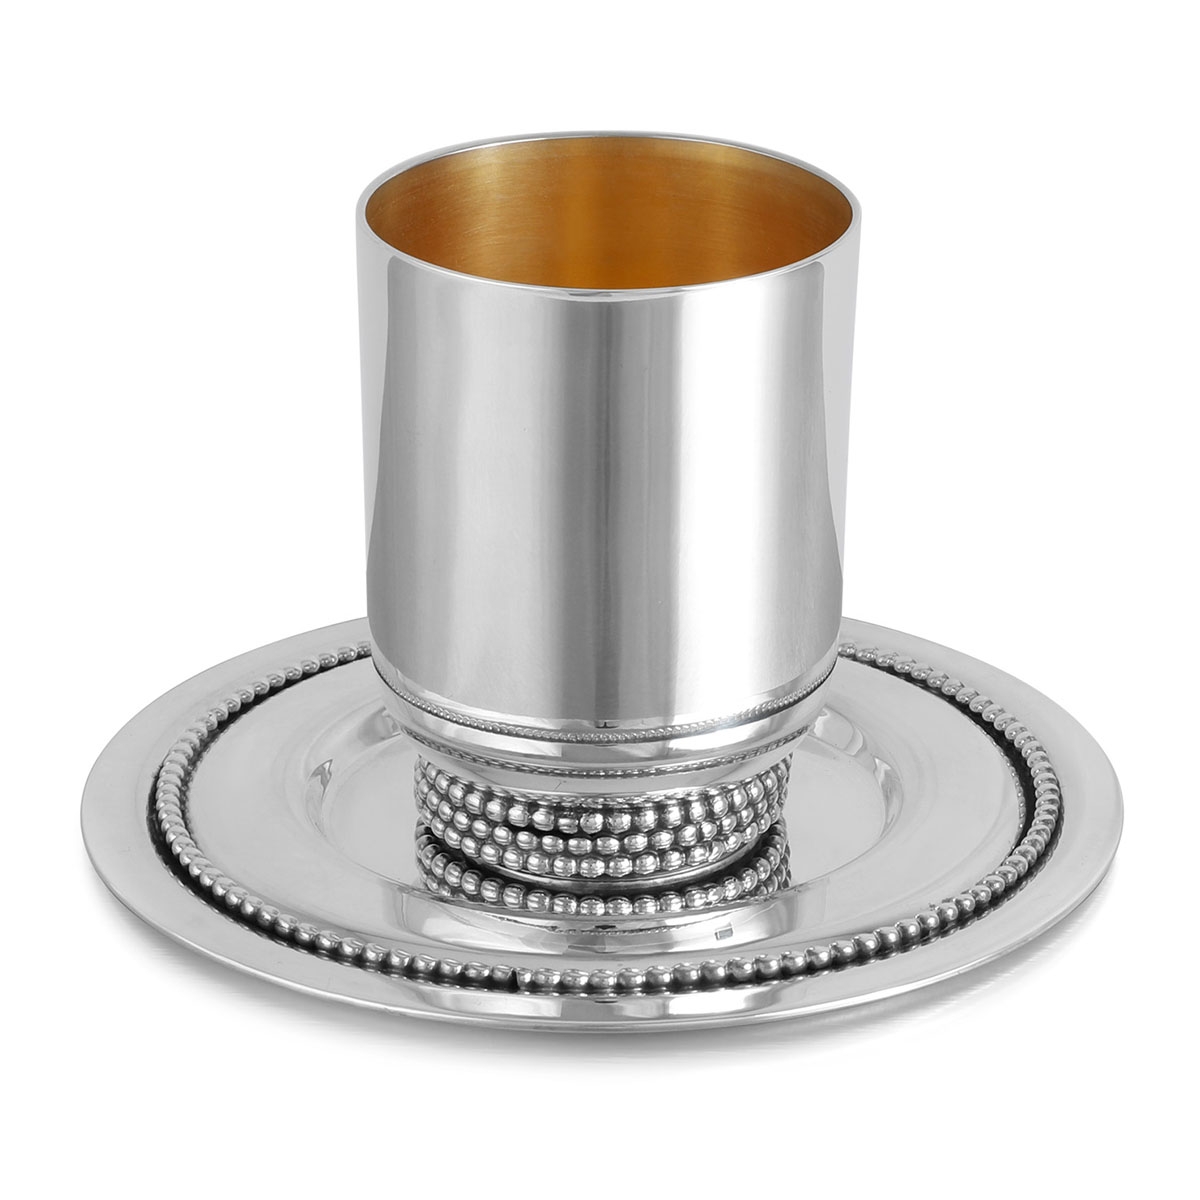 Bier Judaica 925 Sterling Silver Kiddush Cup Set With Beaded Design - 1